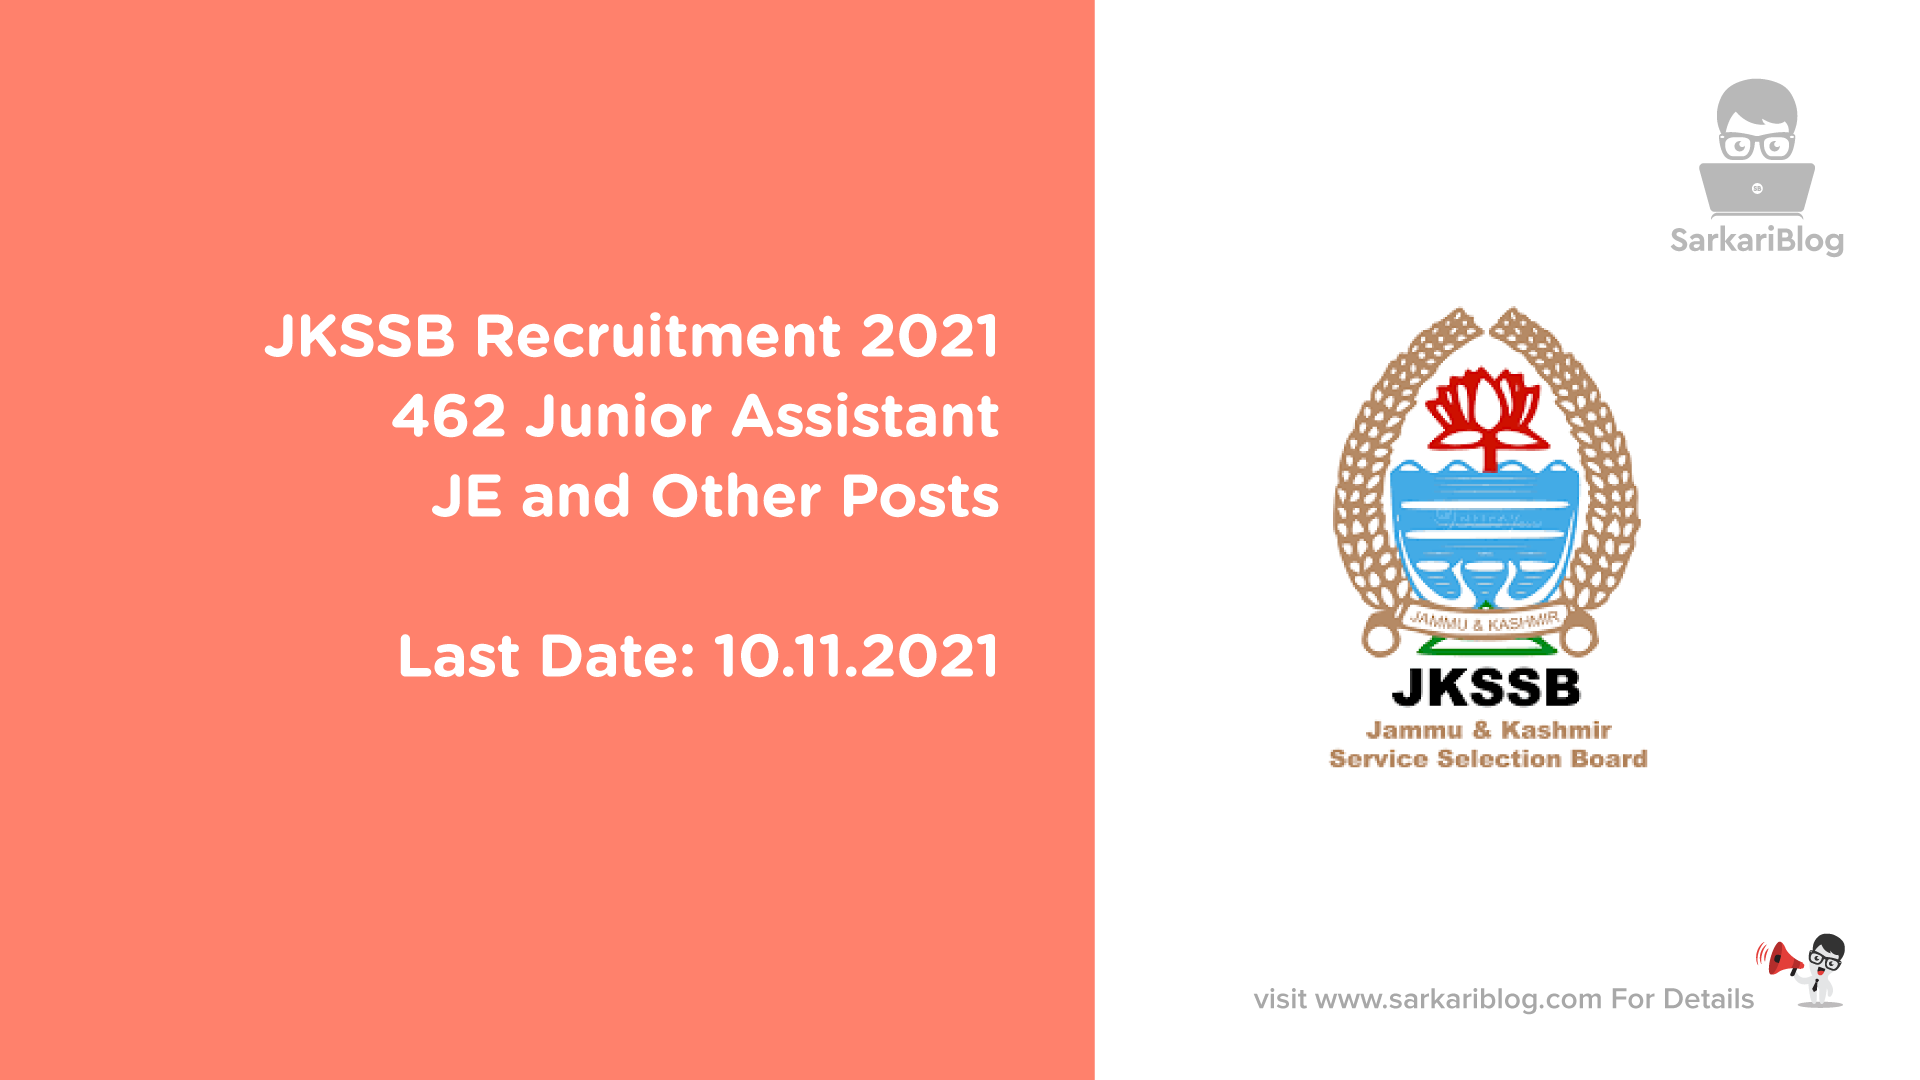 JKSSB Recruitment 2021, 462 Junior Assistant, JE and Other Posts